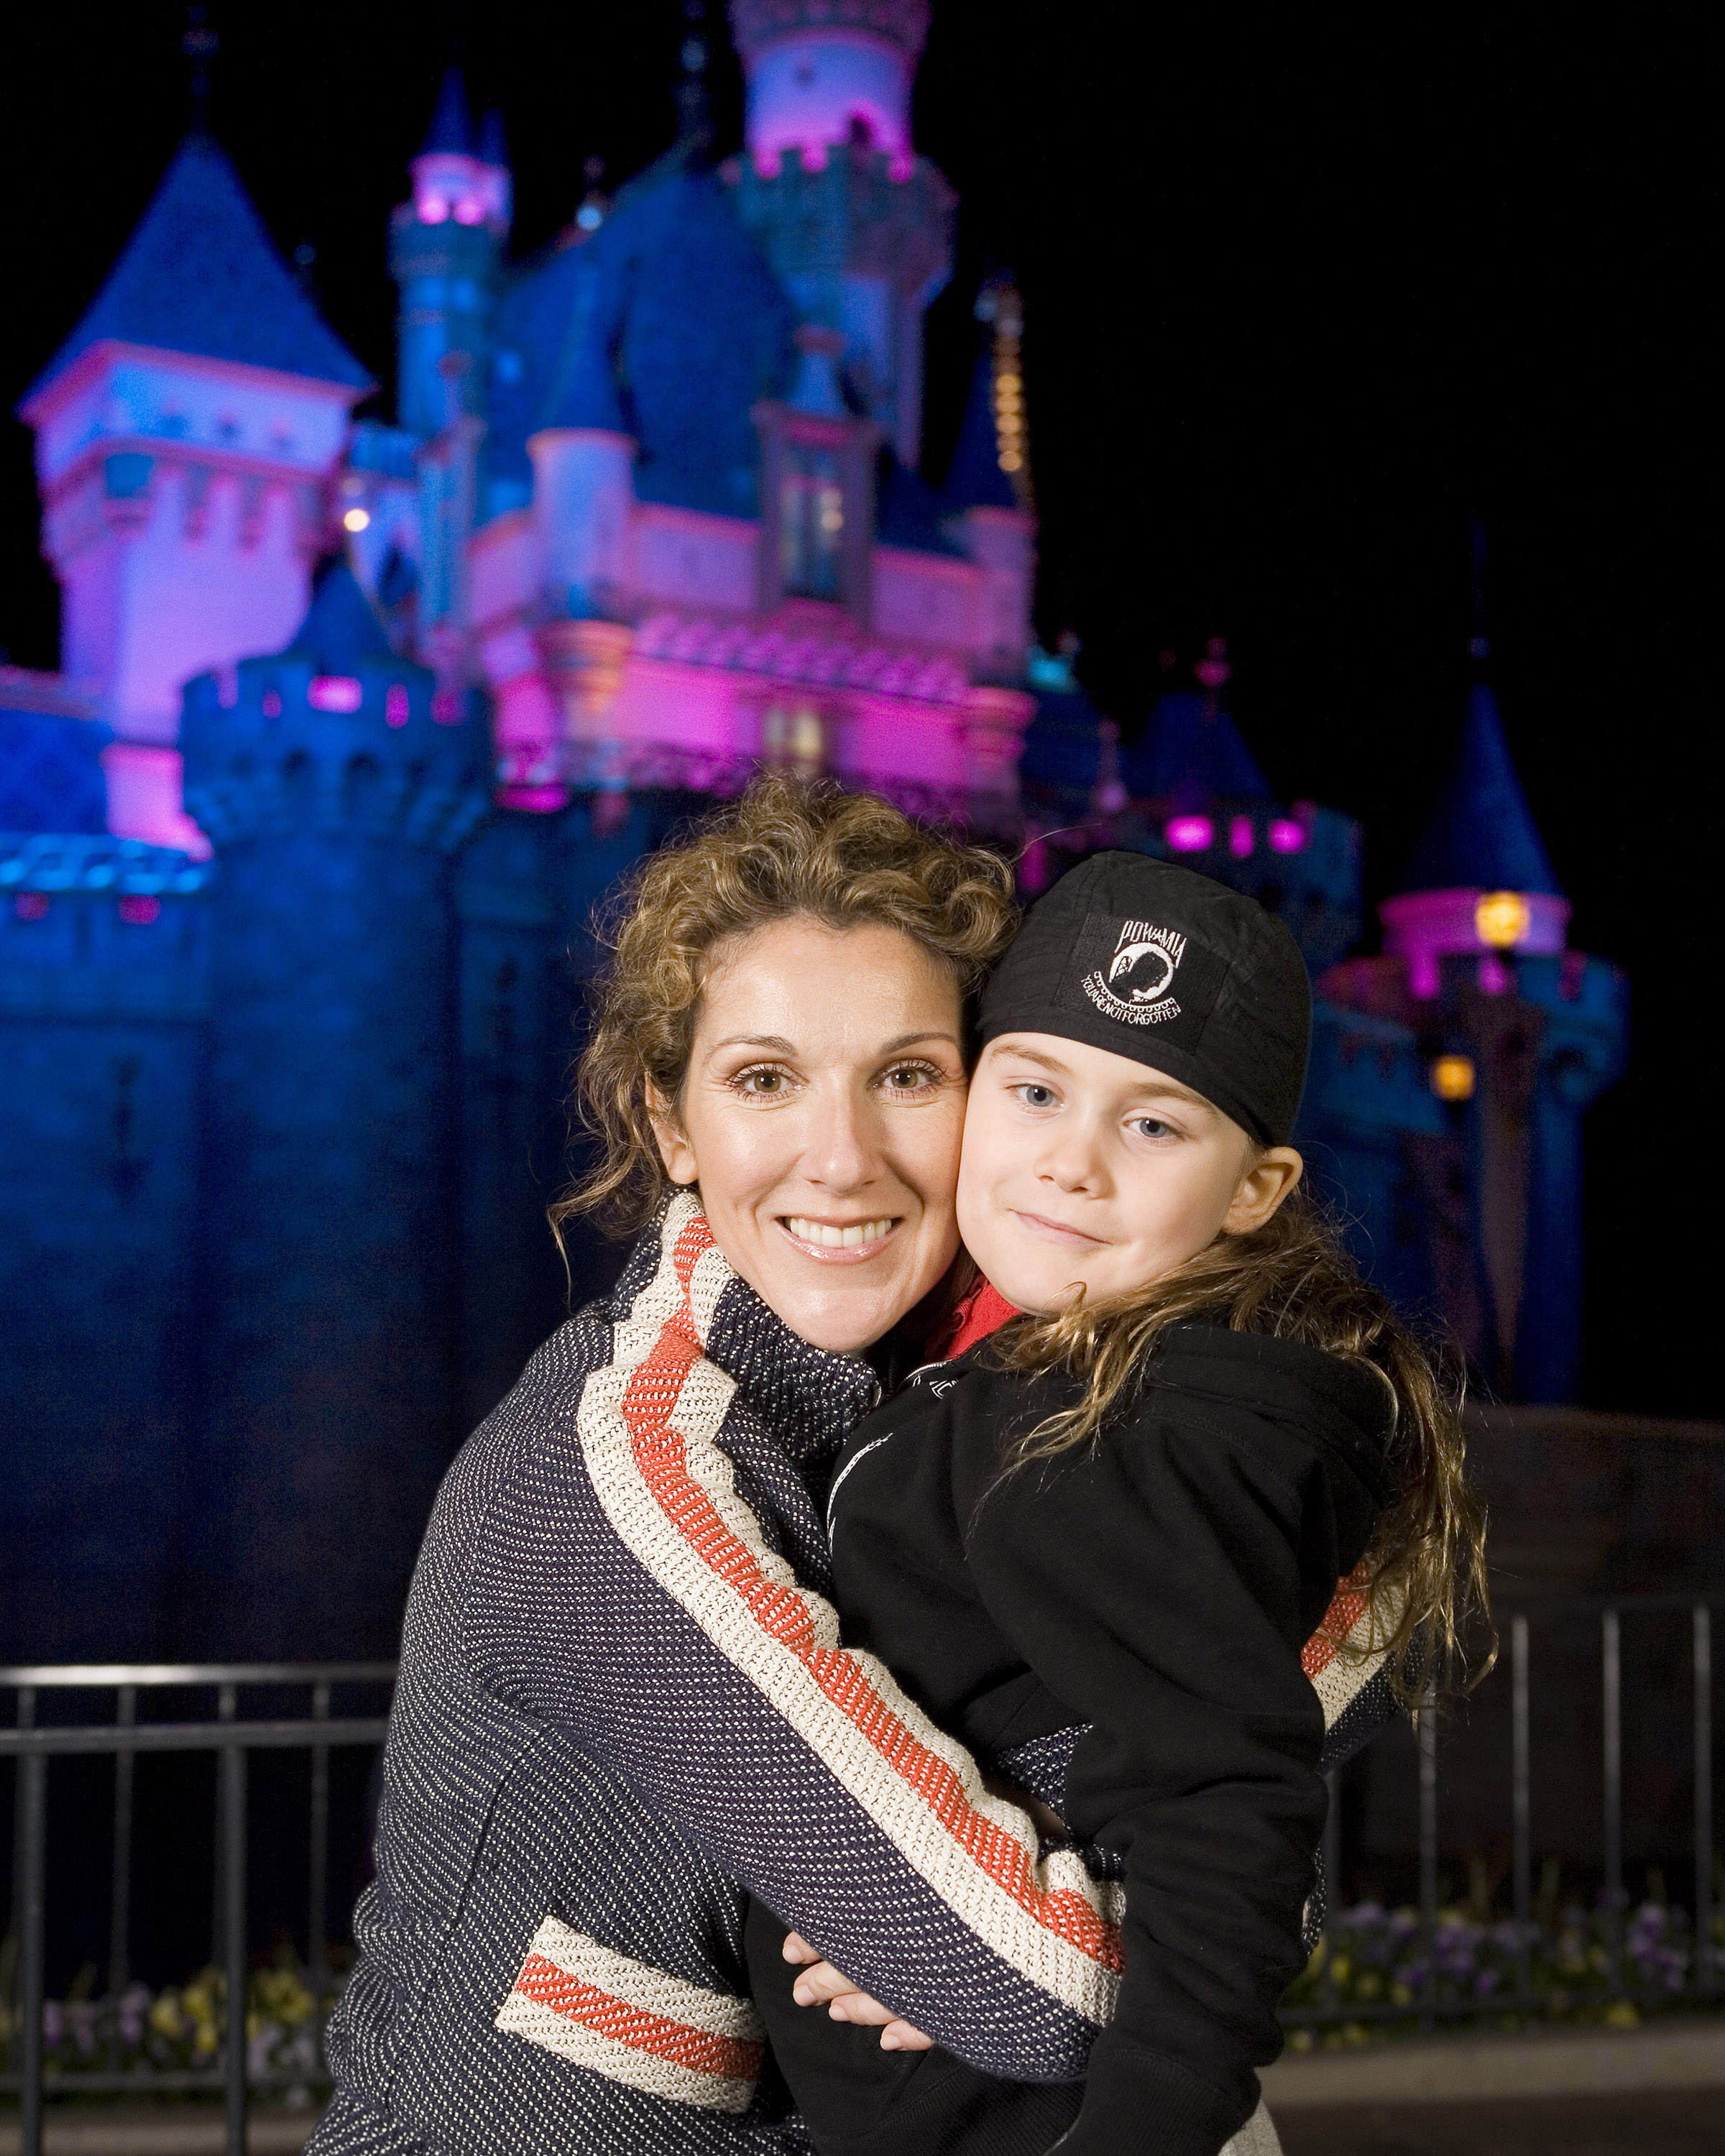 Celine Dion and René-Charles Angélil at Disneyland in Anaheim, 2007 | Source: Getty Images